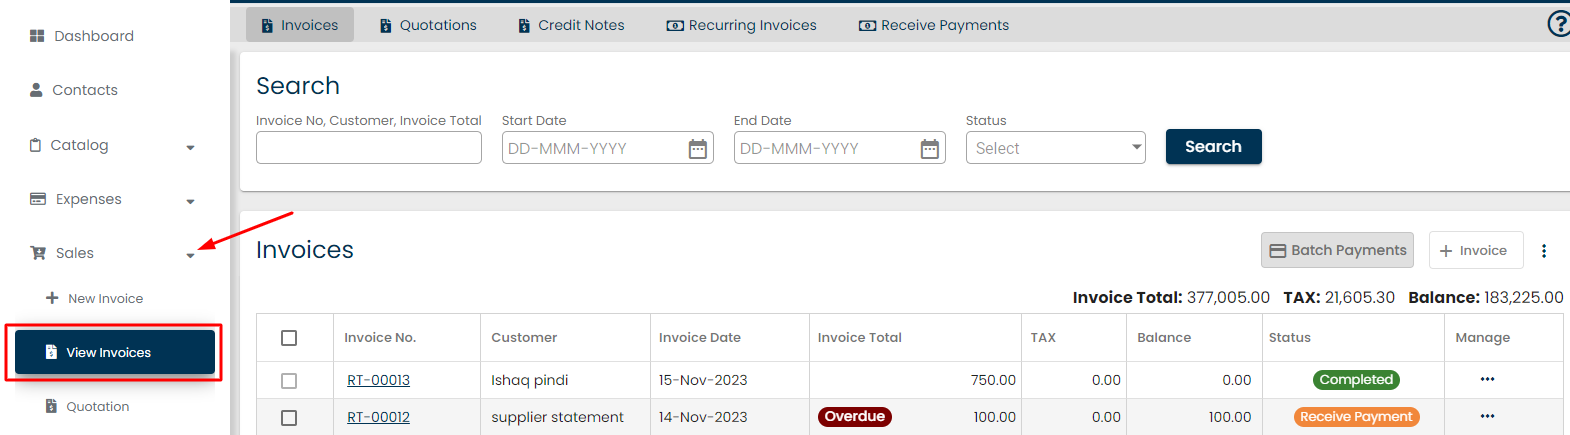 View Invoices button